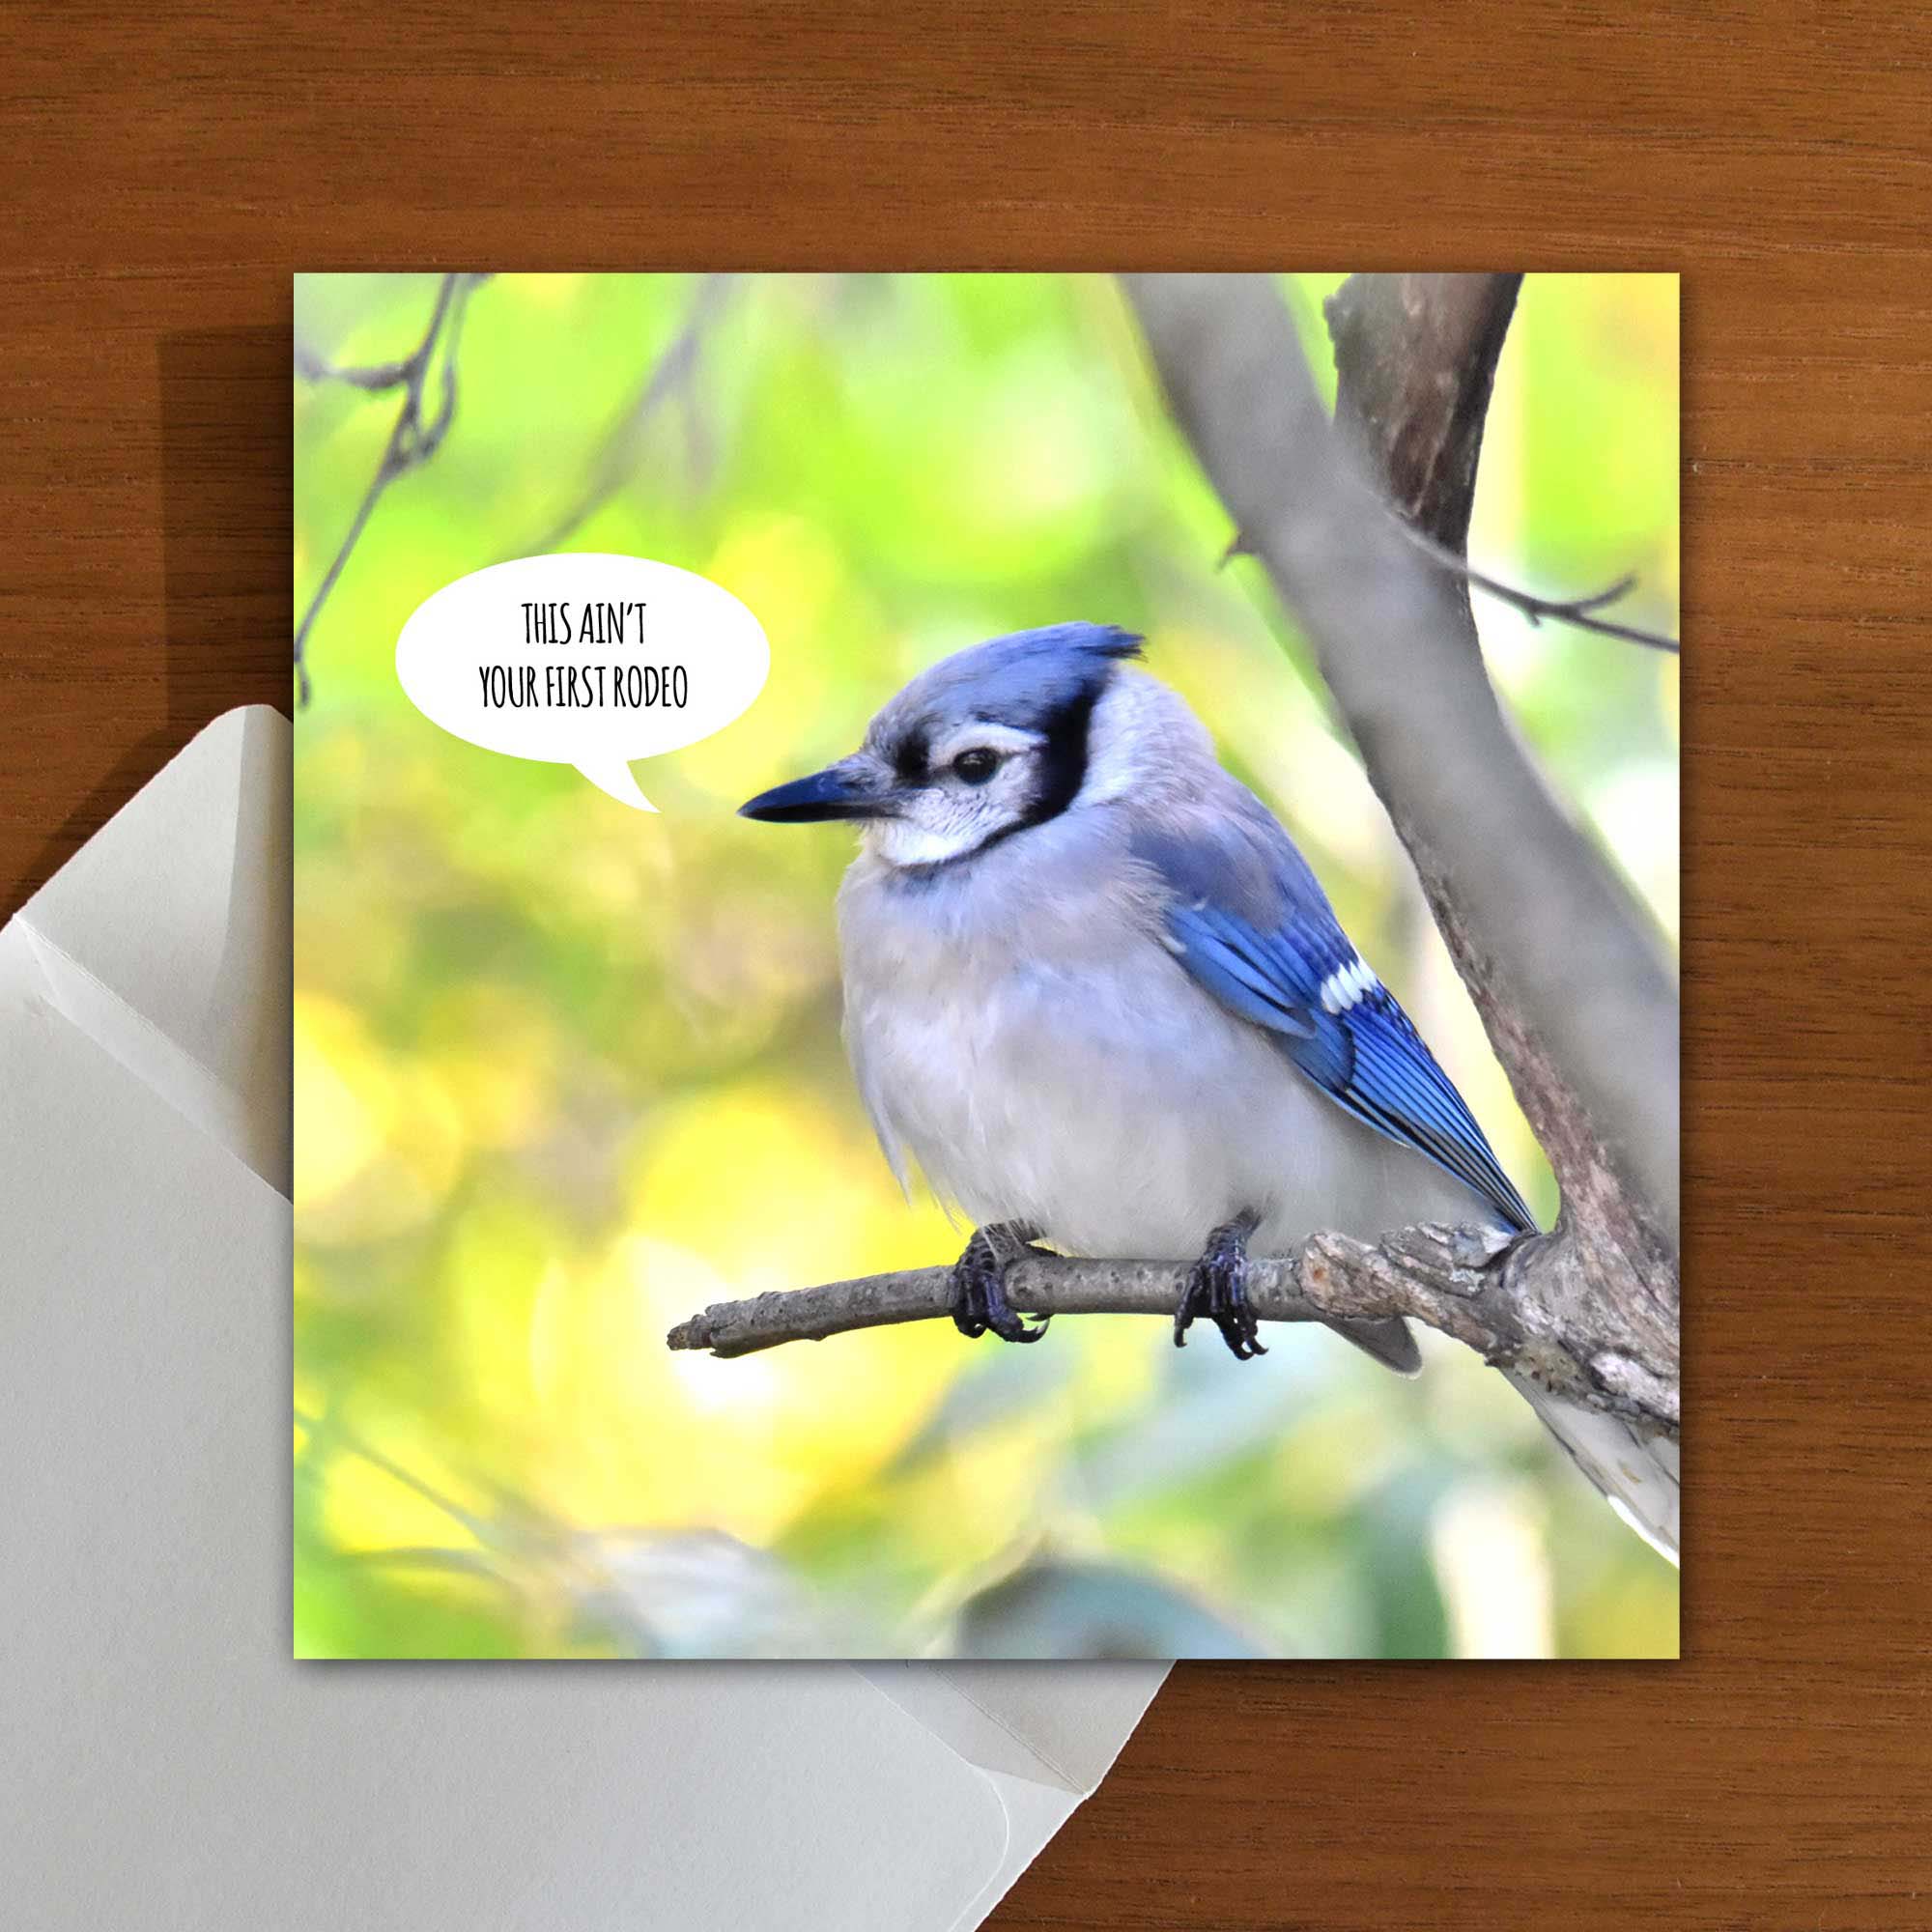 A greeting card with a photo of a bird and a speech bubble saying "This ain't your first rodeo"